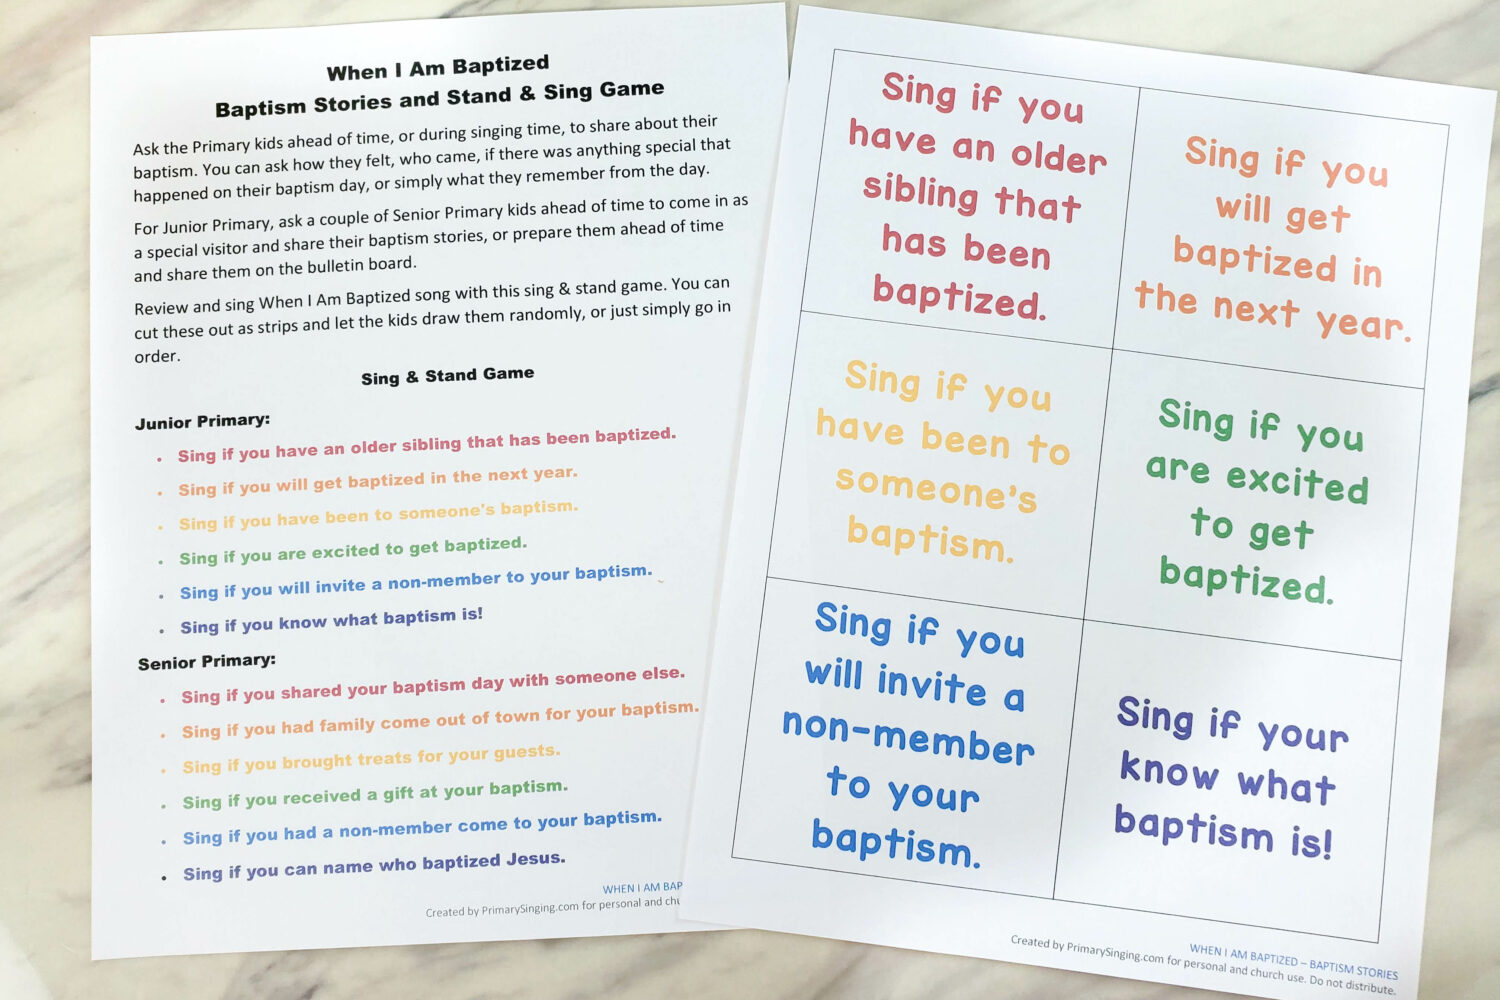 When I Am Baptized Stories Stand and Sing fun prompts to divide your Primary children into 2 groups to sing through the song. Activity for LDS Primary music leaders.